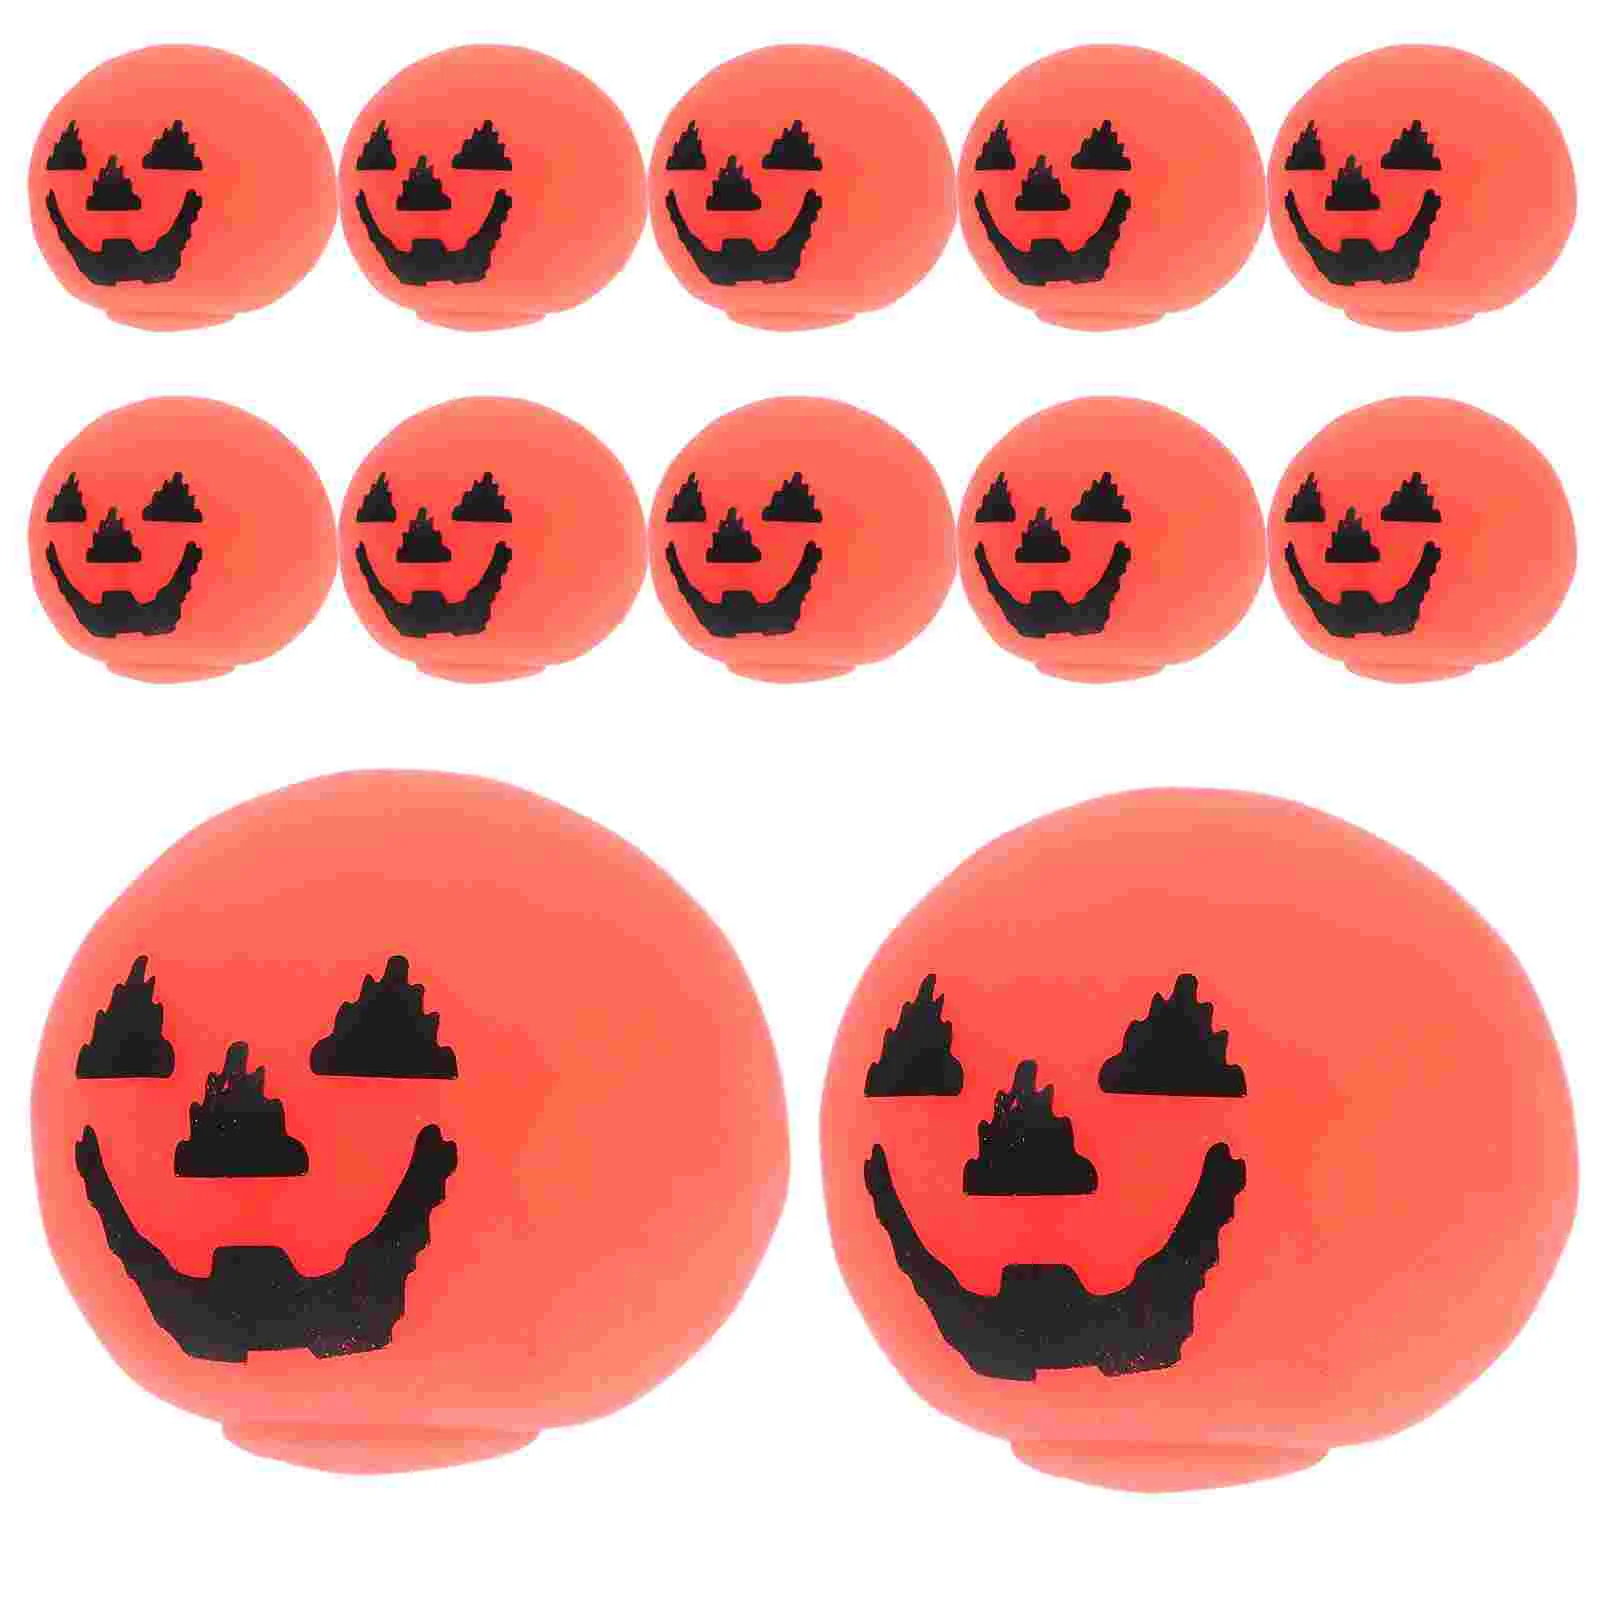 

12 Pcs Party Accessory Pumpkin Stress Balls Halloween Decor Plaything Toy Squeeze Prop Decorative Horror